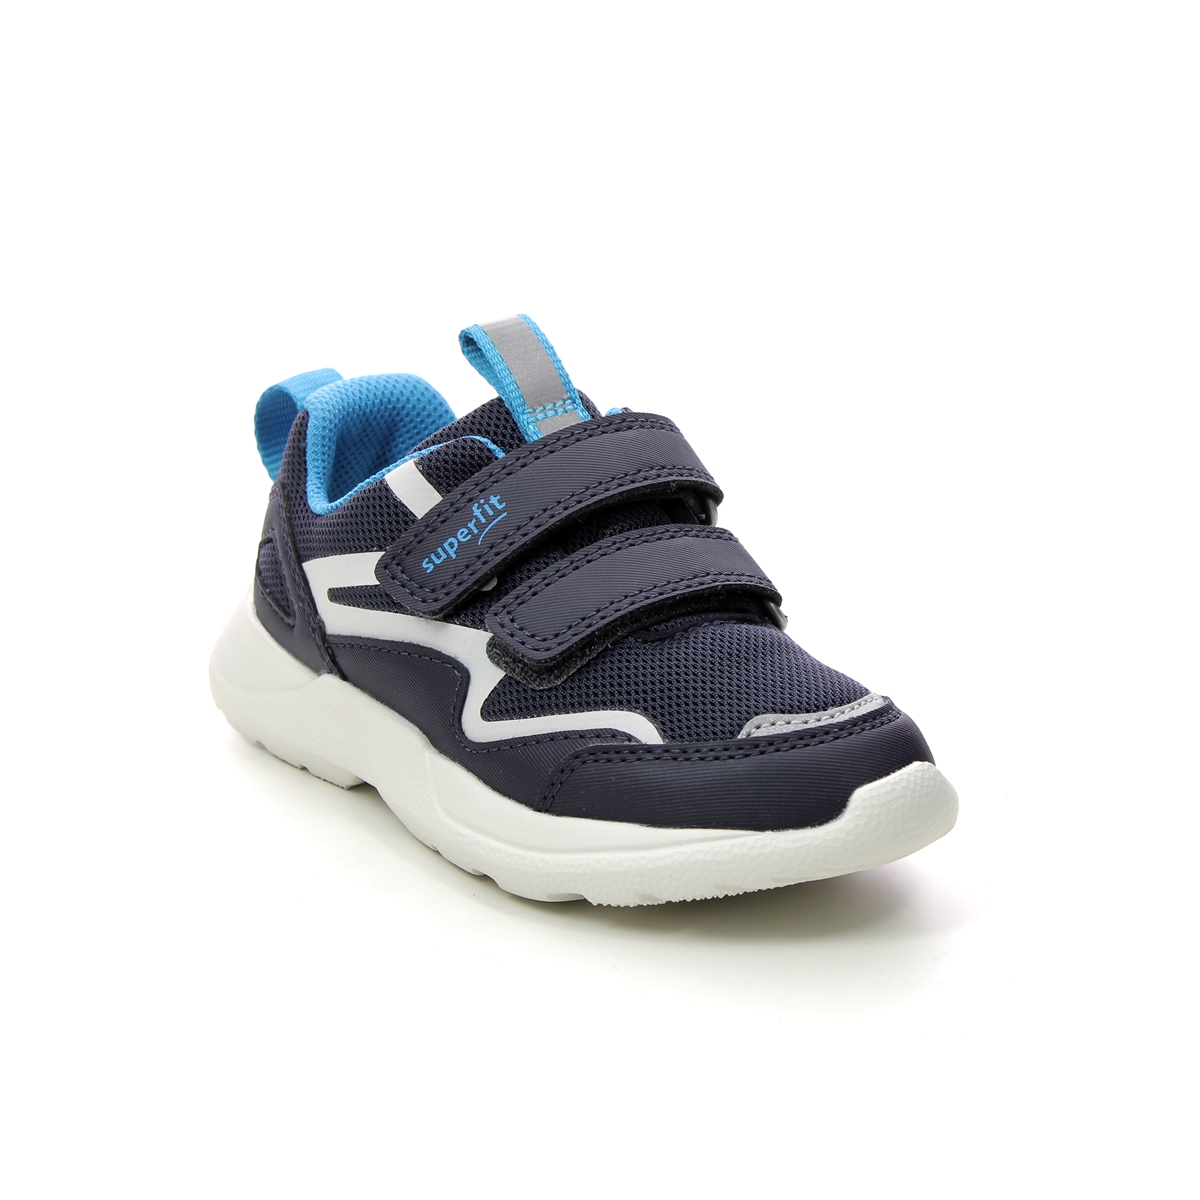 Superfit Rush Mini Navy Kids Trainers 1006206-8000 In Size 21 In Plain Navy For kids